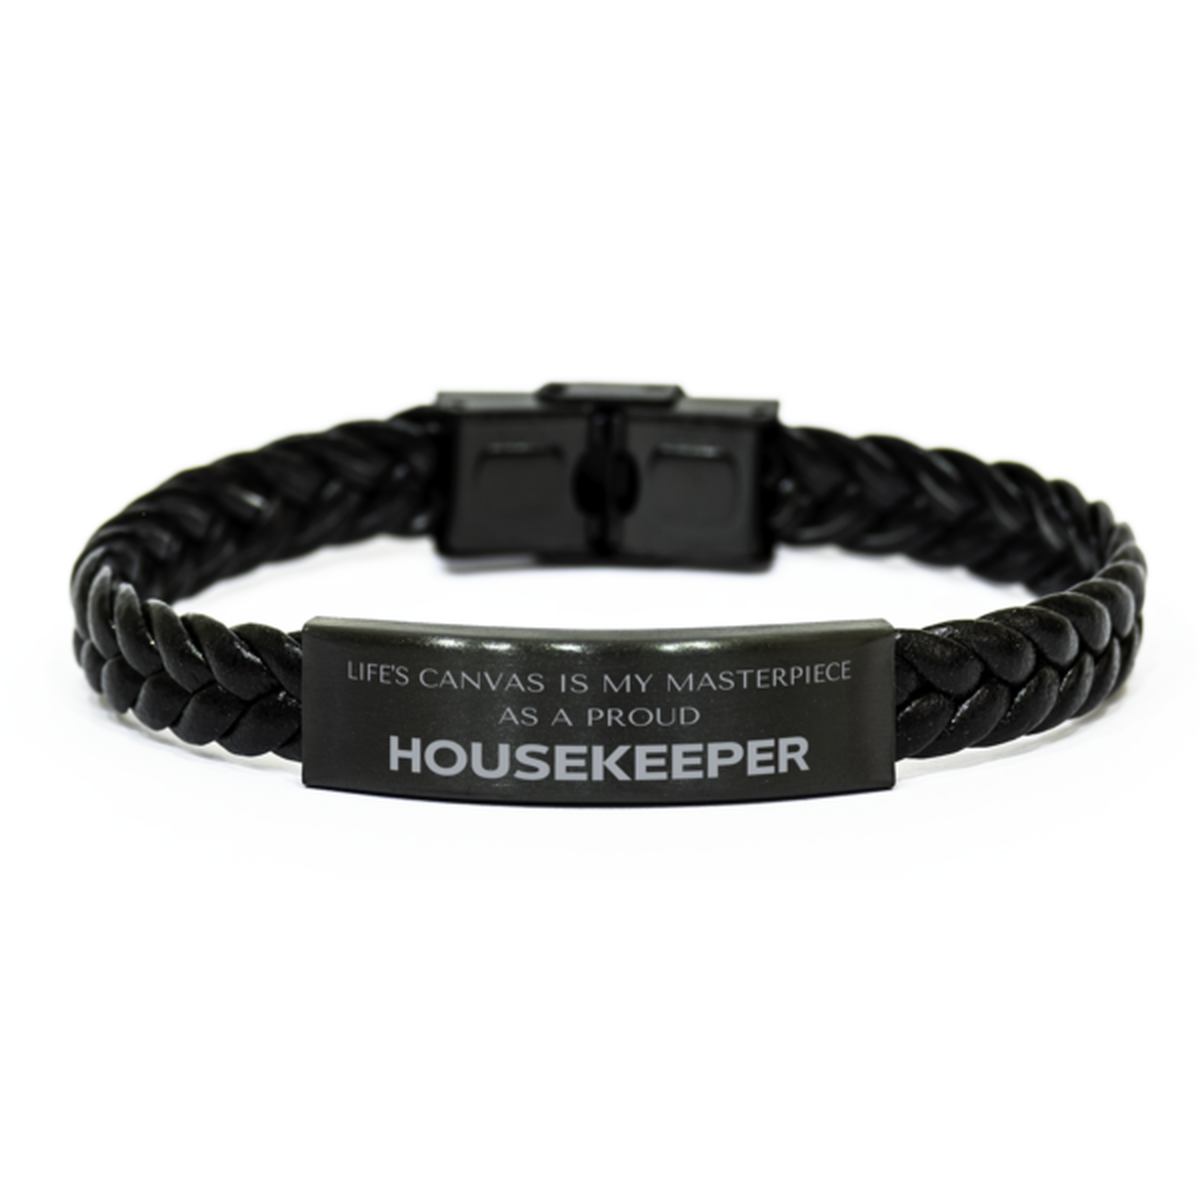 Proud Housekeeper Gifts, Life's canvas is my masterpiece, Epic Birthday Christmas Unique Braided Leather Bracelet For Housekeeper, Coworkers, Men, Women, Friends